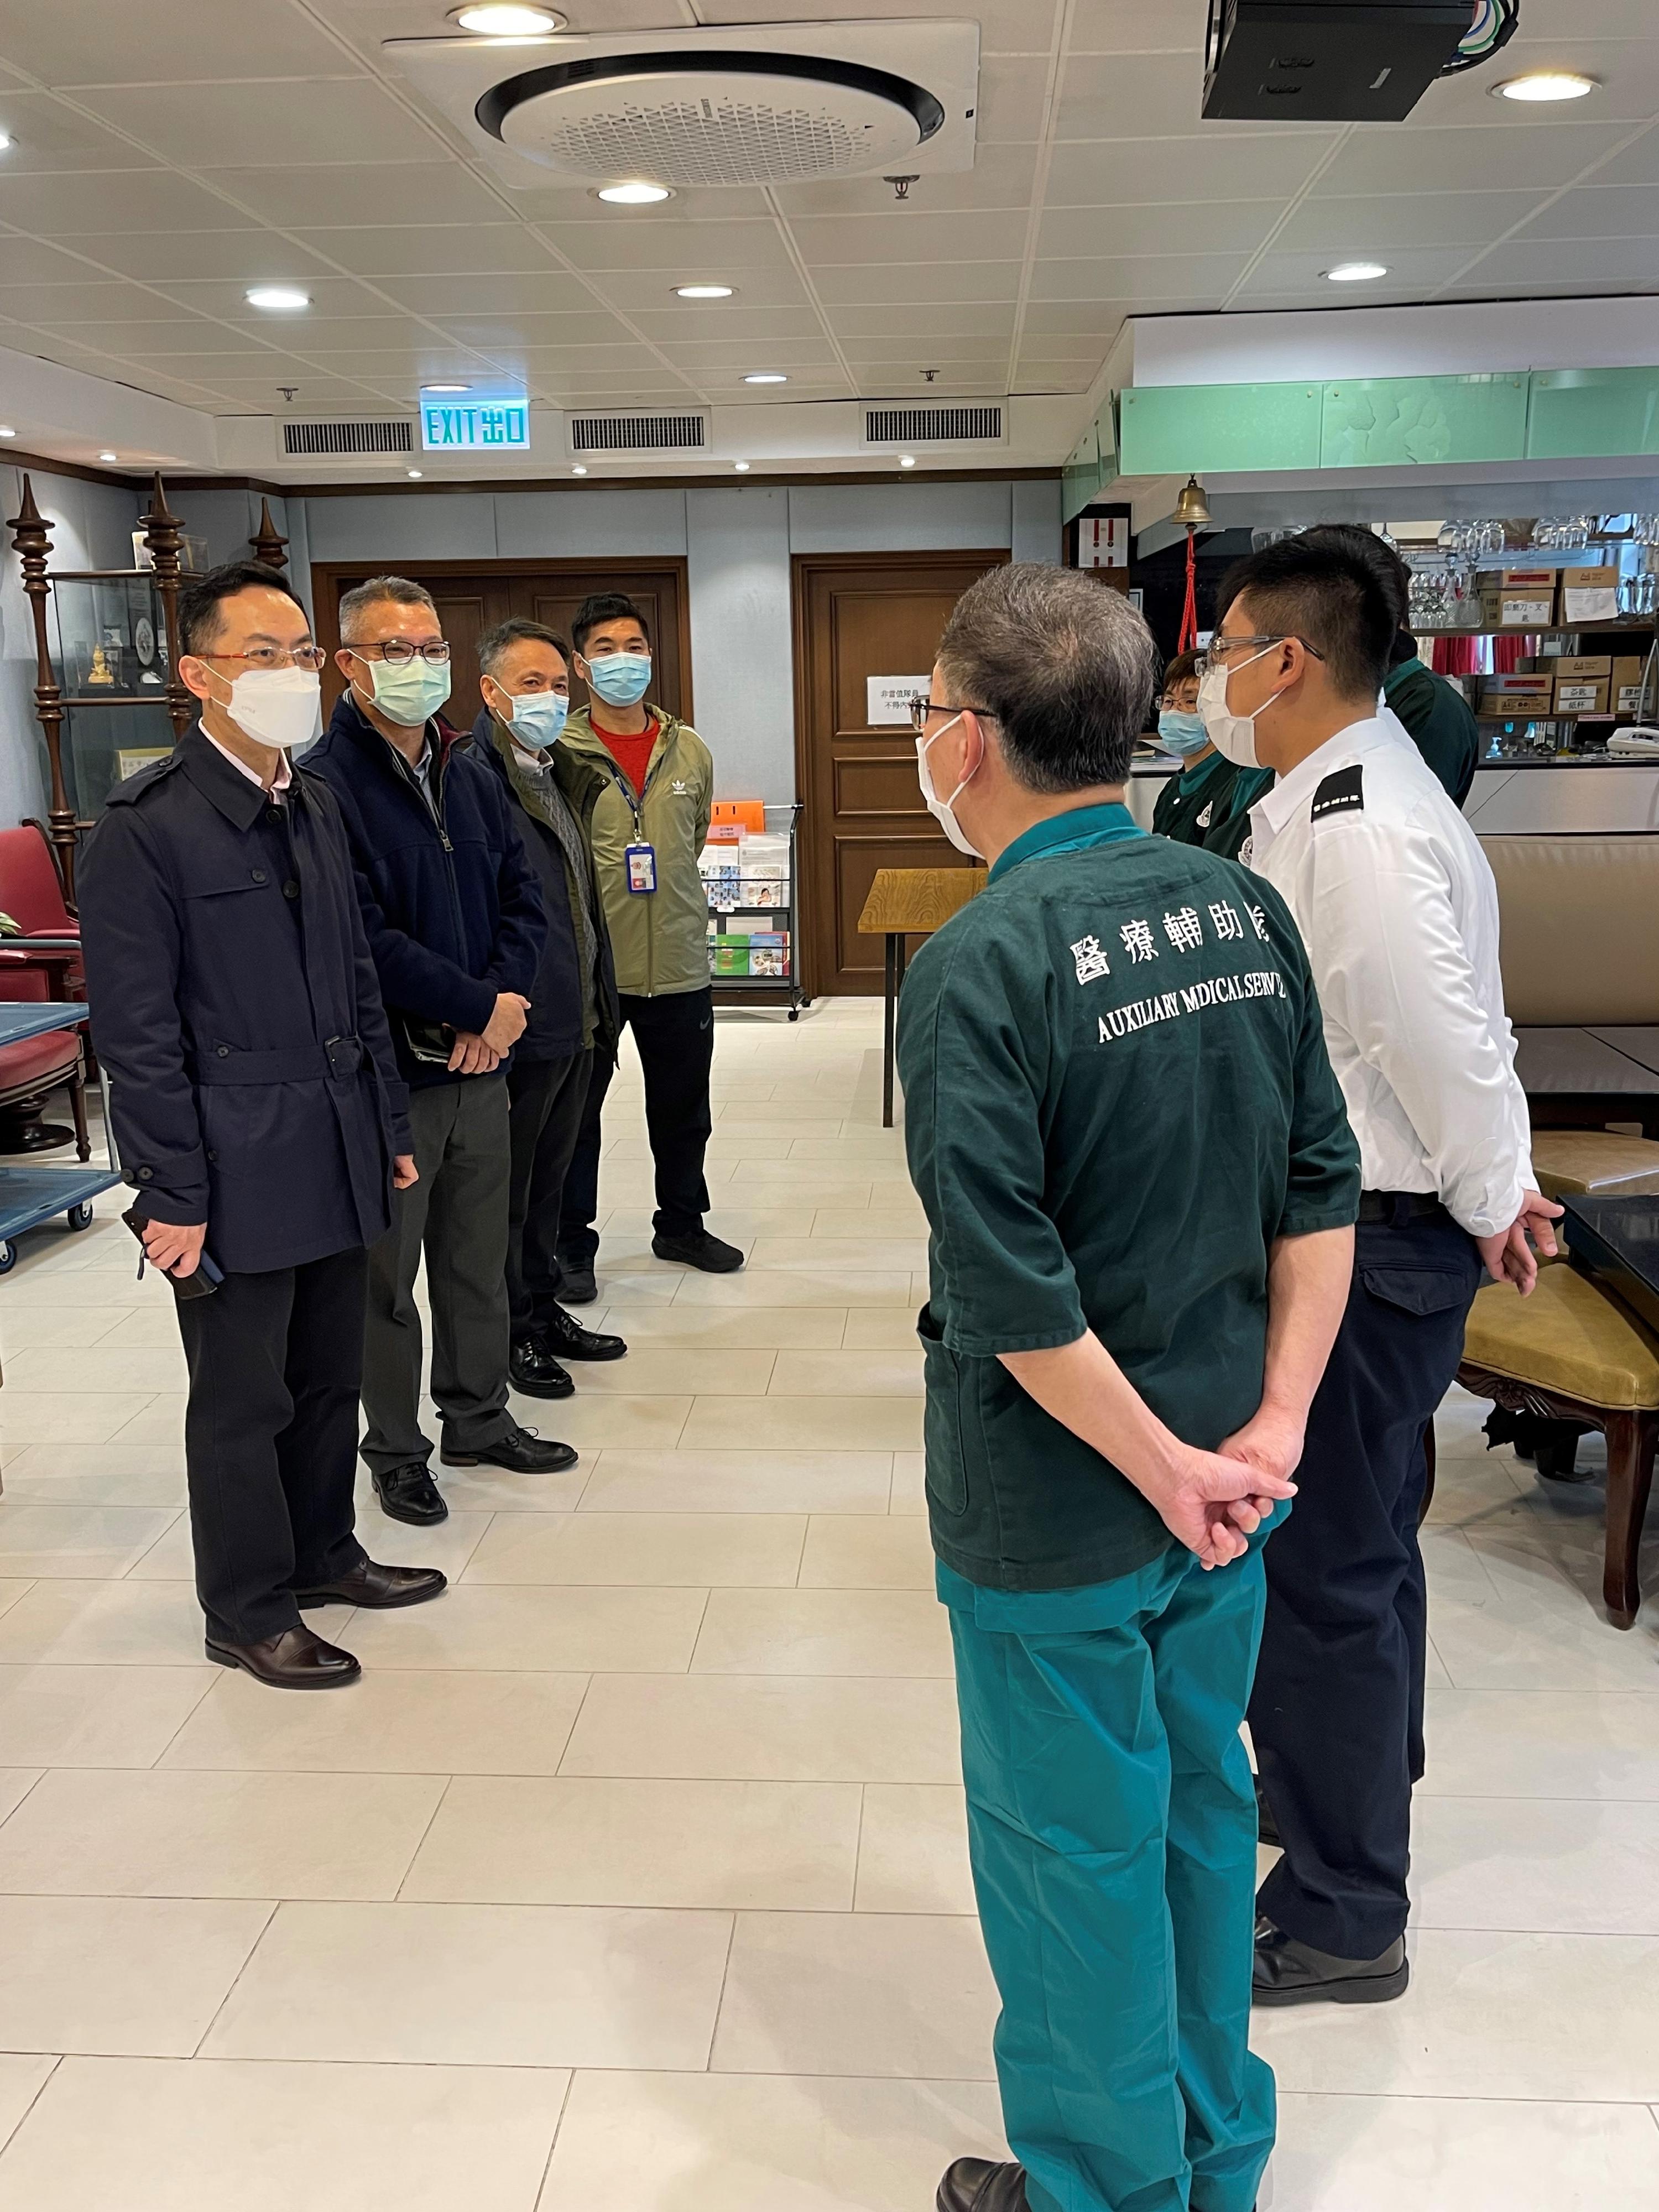 The Commissioner of the Auxiliary Medical Service (AMS), Dr Ronald Lam, today (February 2) visited colleagues on duty at the AMS Headquarters in Ho Man Tin. Photo shows Dr Lam (first left), accompanied by the Chief Staff Officer of the AMS, Mr Wong Ying-keung (second left), listening to AMS members' briefing on their daily work.